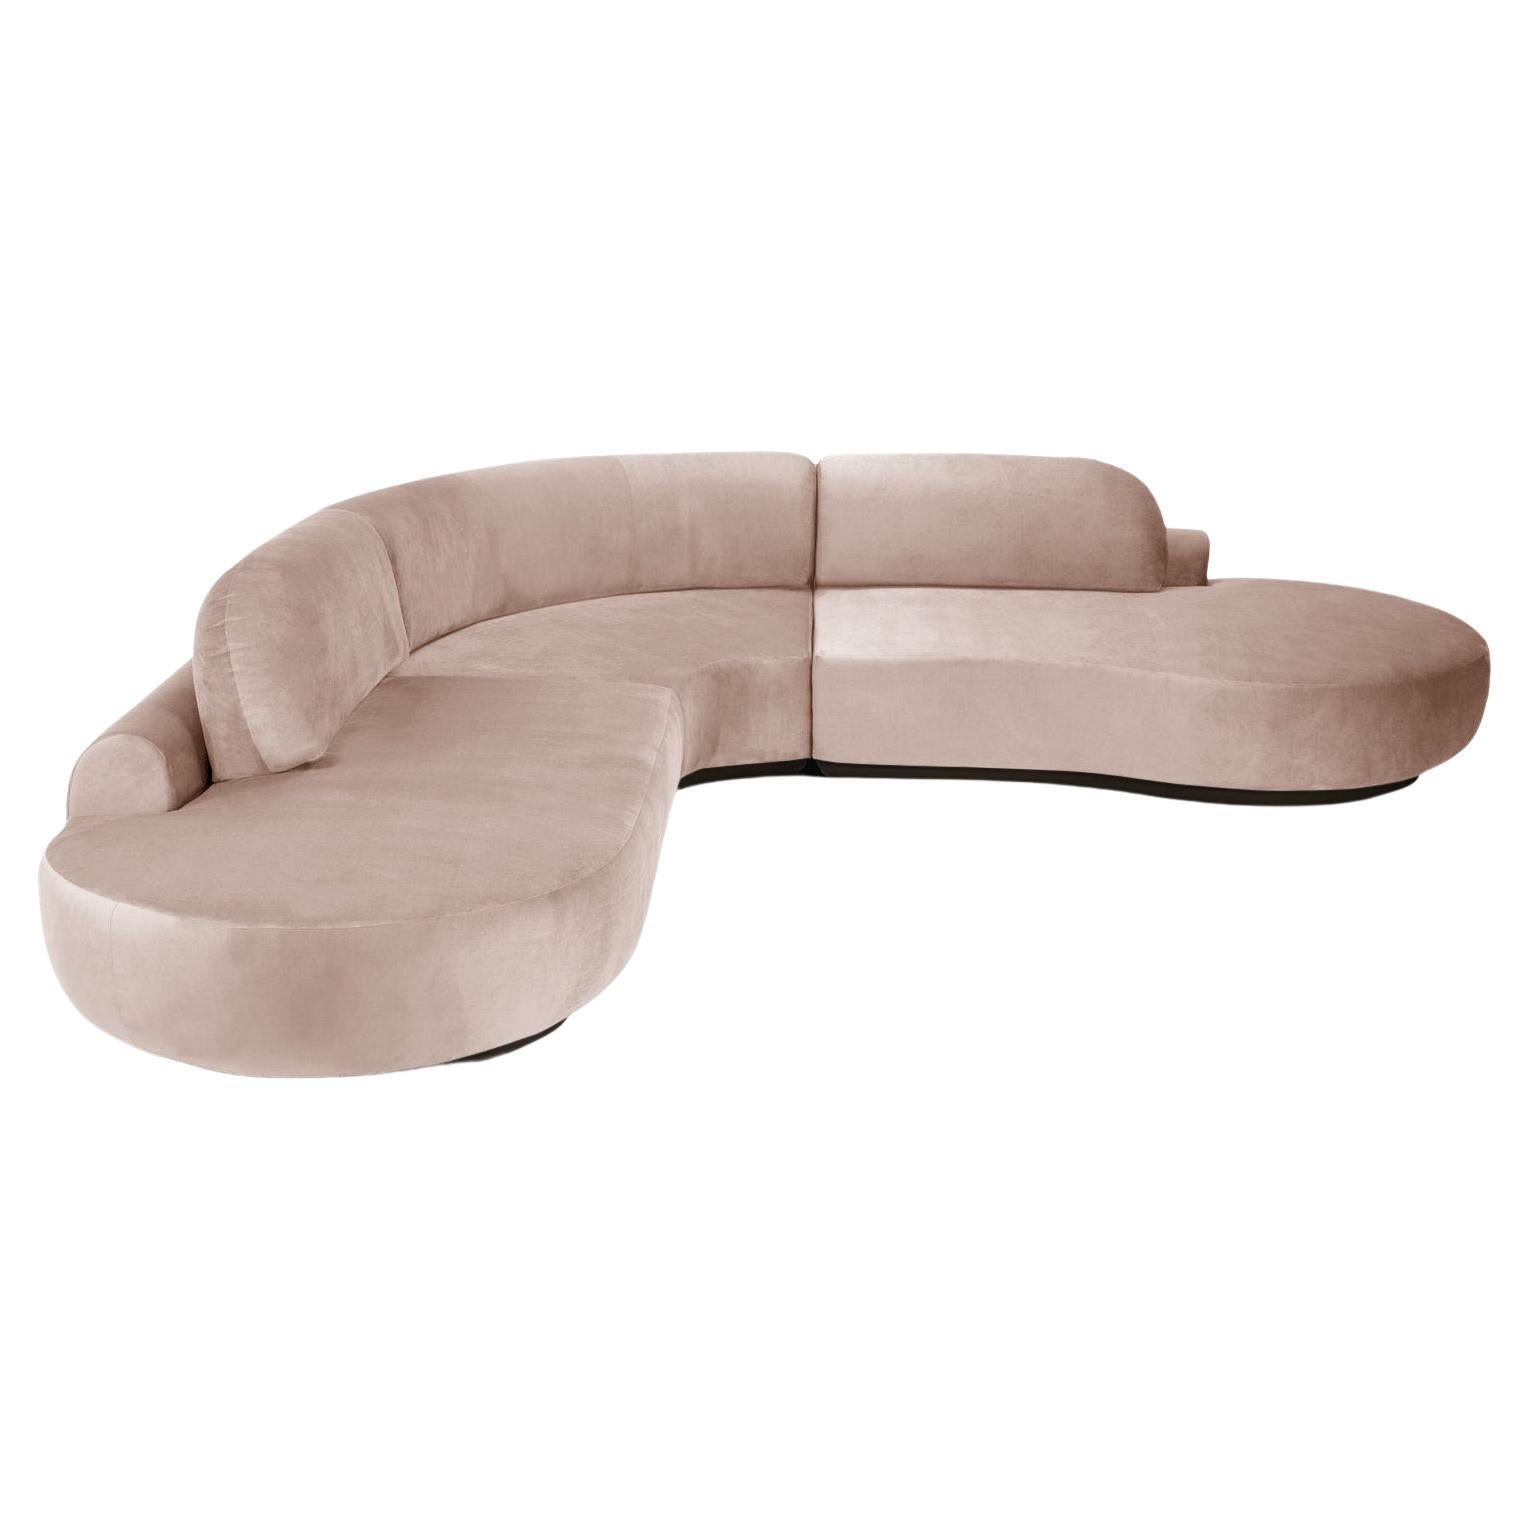 Naked Curved Sectional Sofa, 3 Piece with Beech Ash-056-5 and Vigo Blossom For Sale